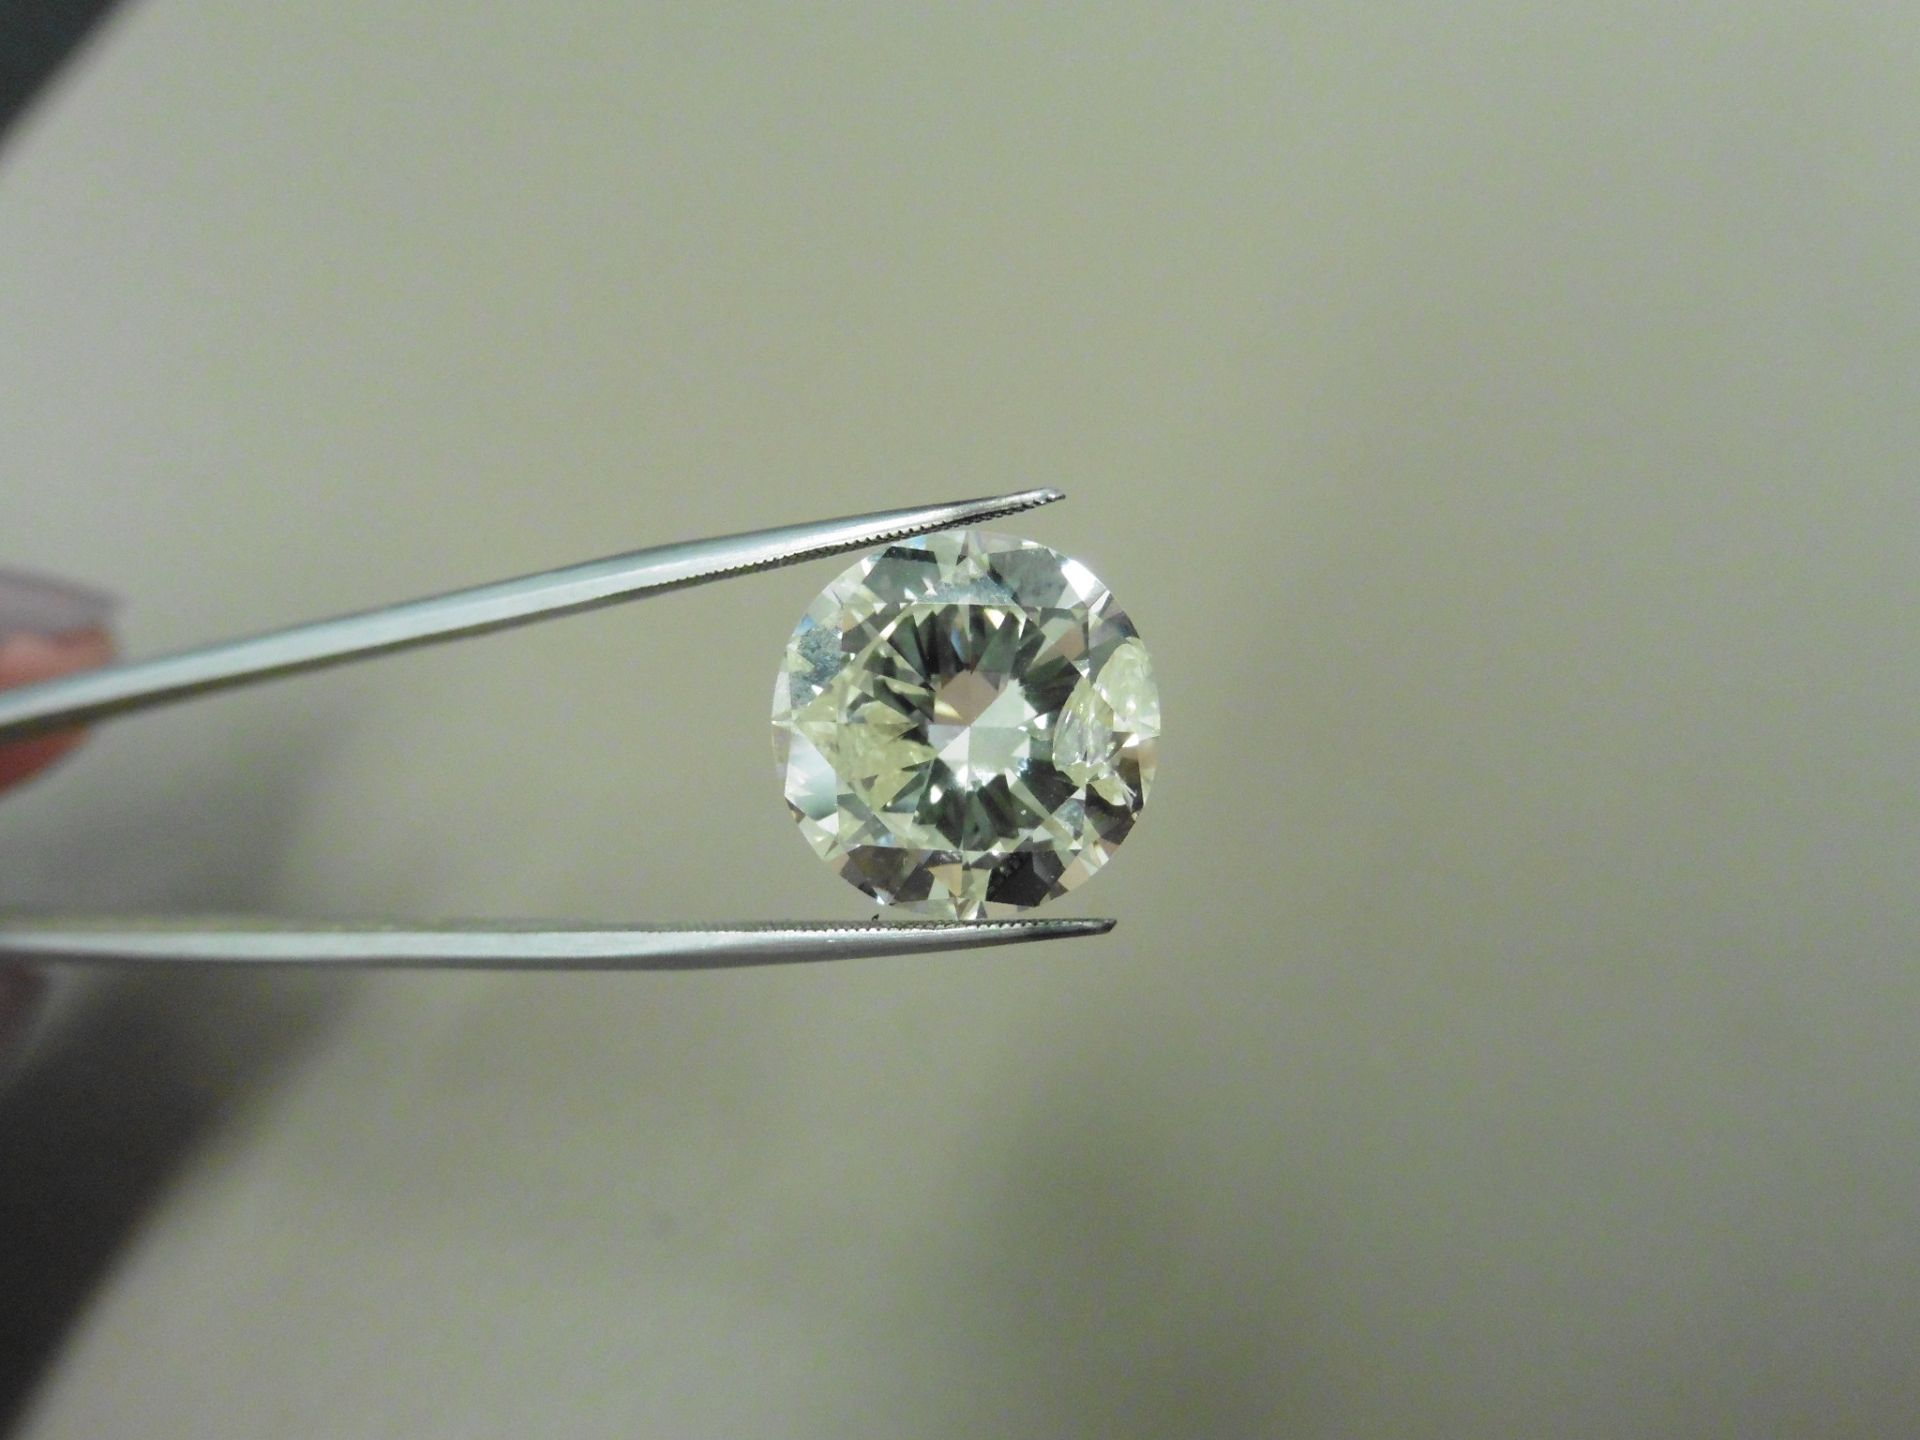 6.38ct natural loose brilliant cut diamond. K colourand I1 clarity. EGL certification. Valued at £ - Image 5 of 5